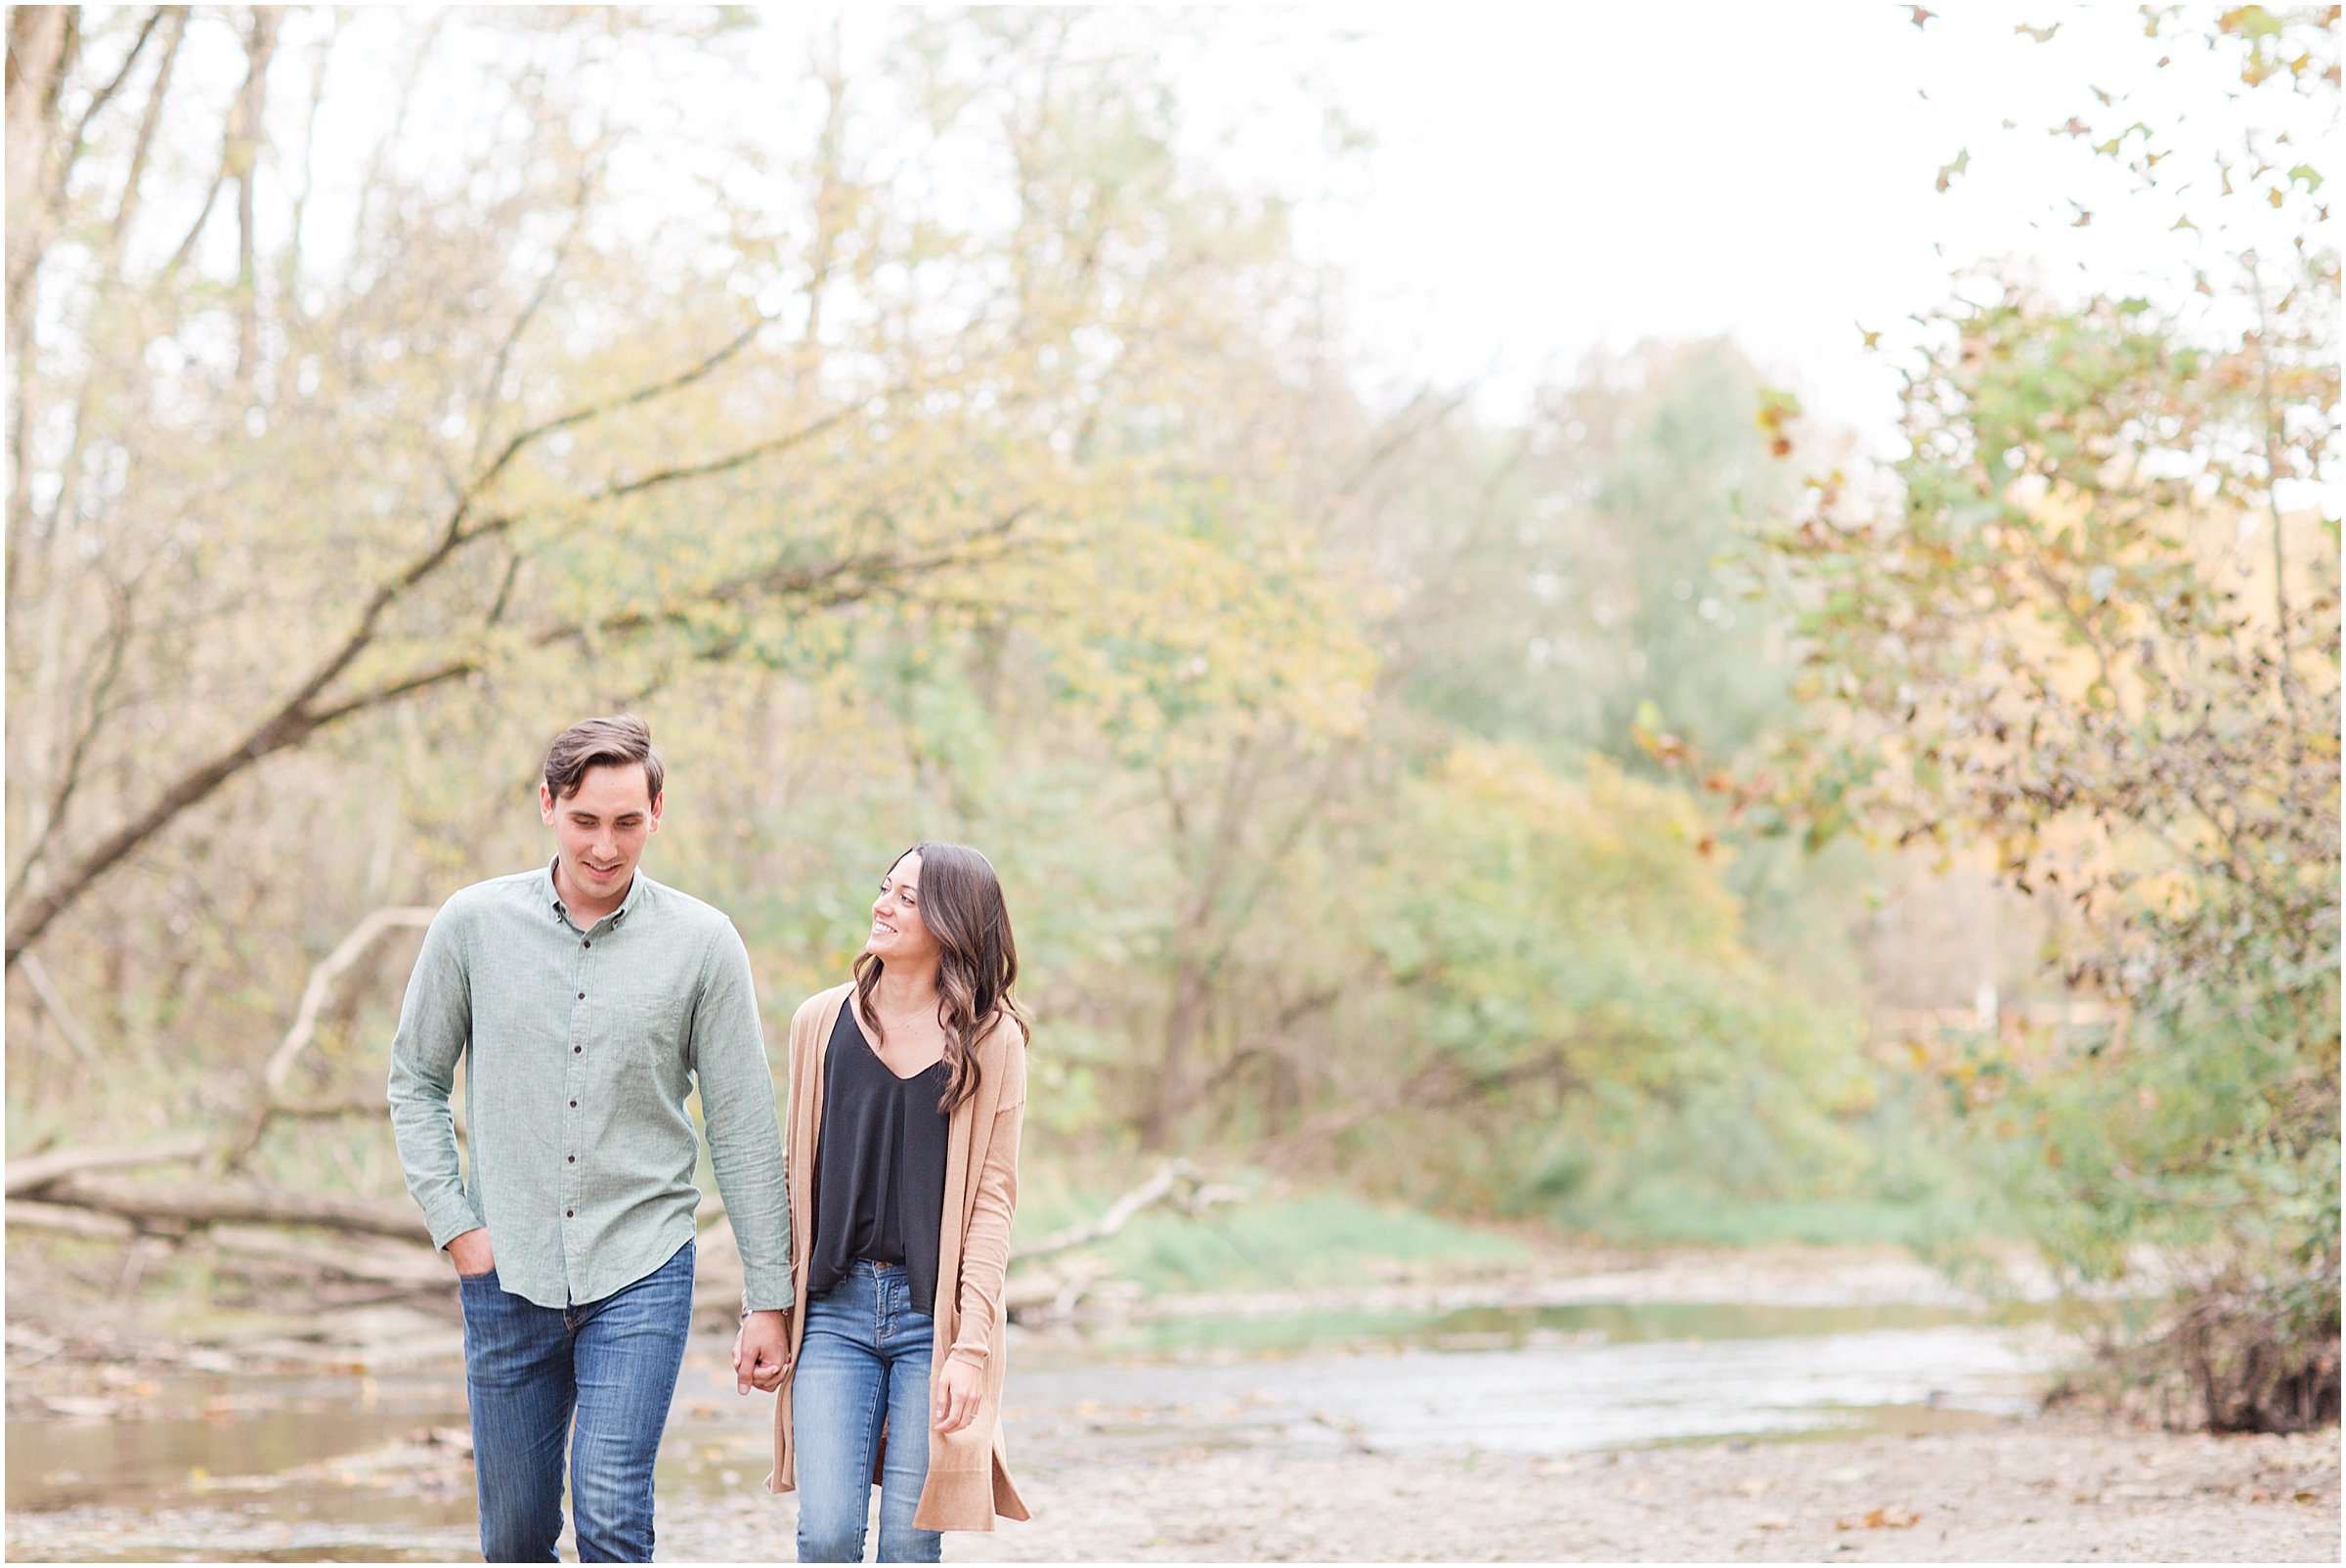 Locally Grown Gardens Engagement Session_0007.jpg